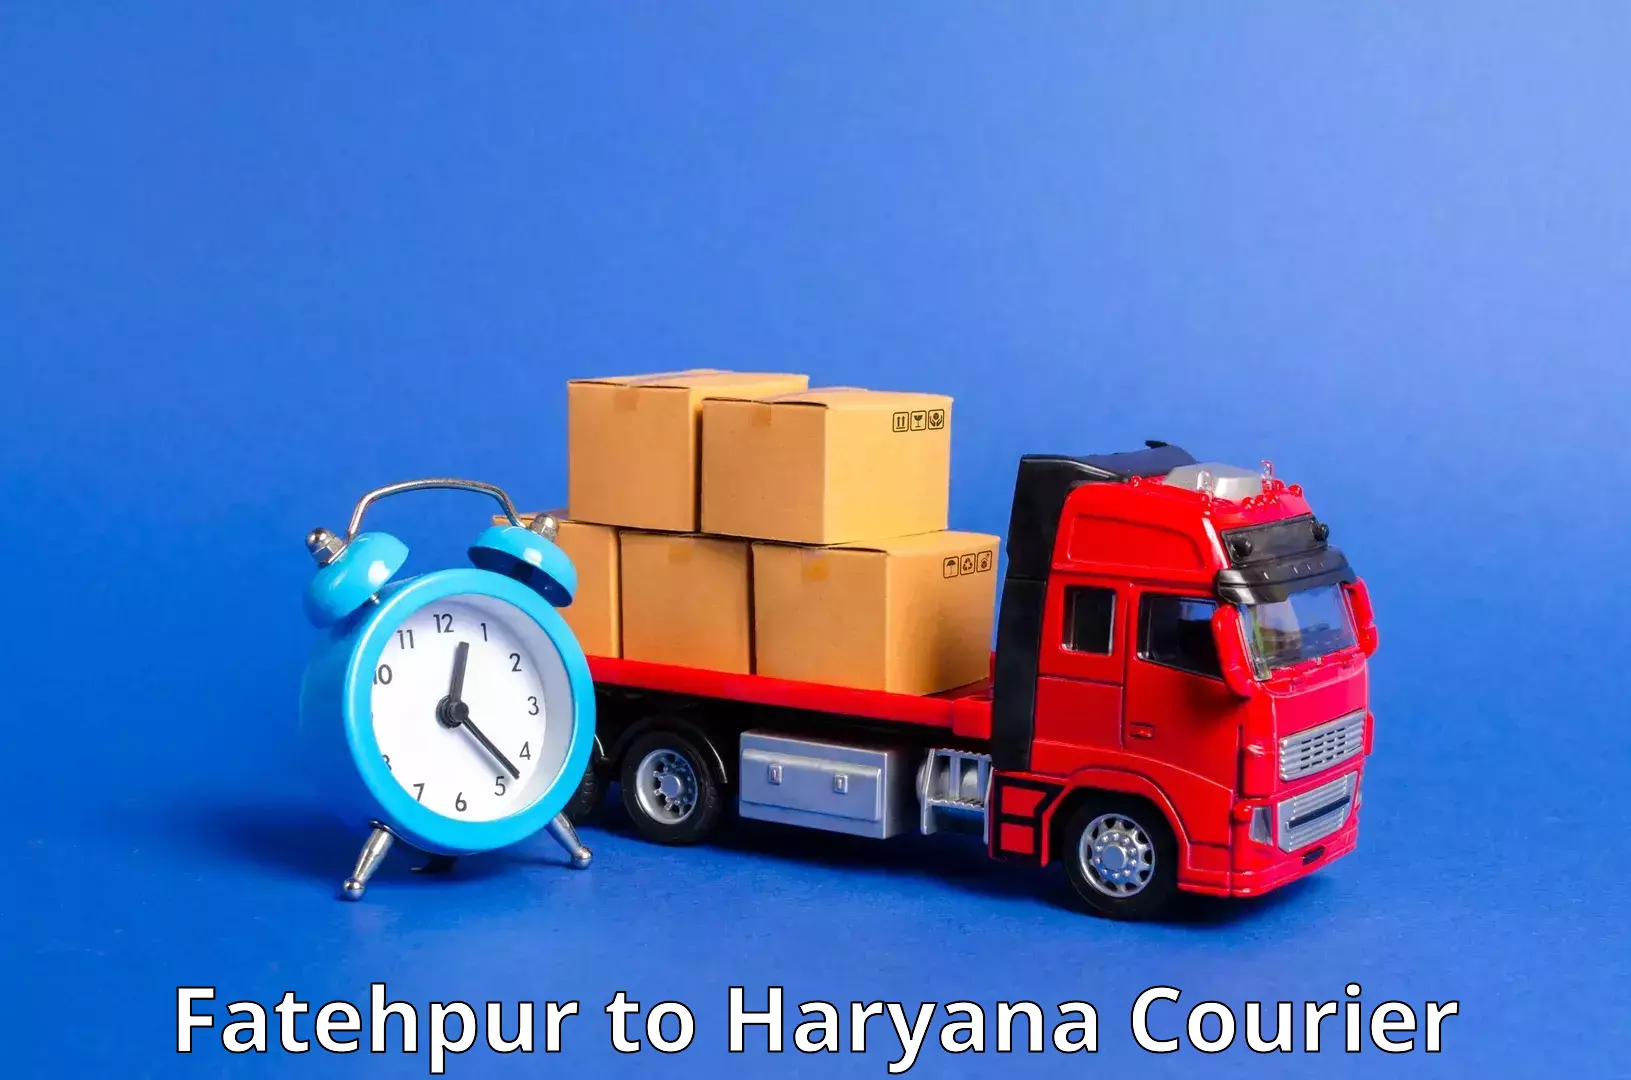 Weekend courier service in Fatehpur to Chaudhary Charan Singh Haryana Agricultural University Hisar